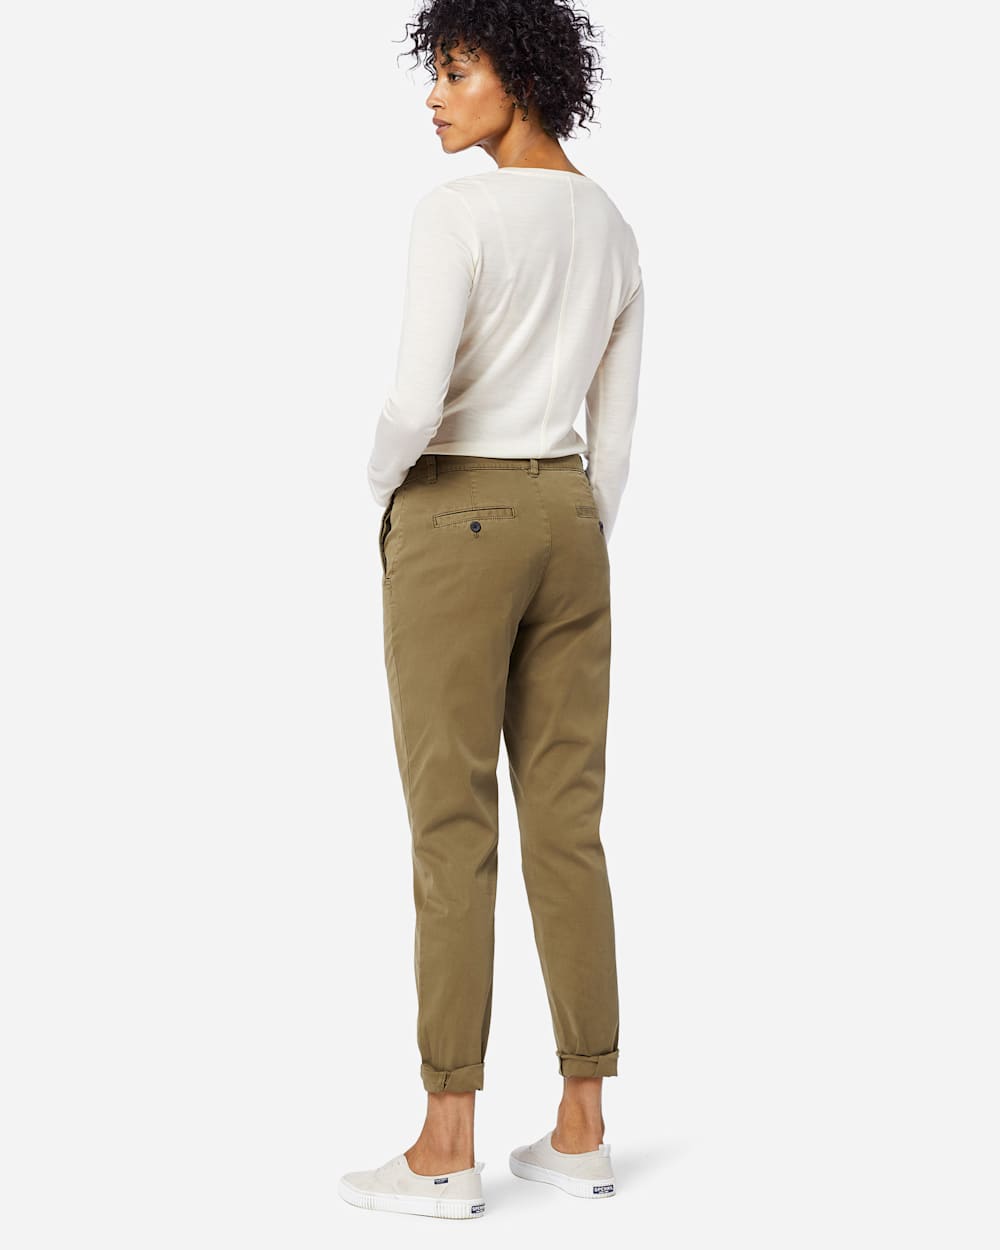 ADDITIONAL VIEW OF TRUE CHINO PANTS IN MILITARY OLIVE image number 2